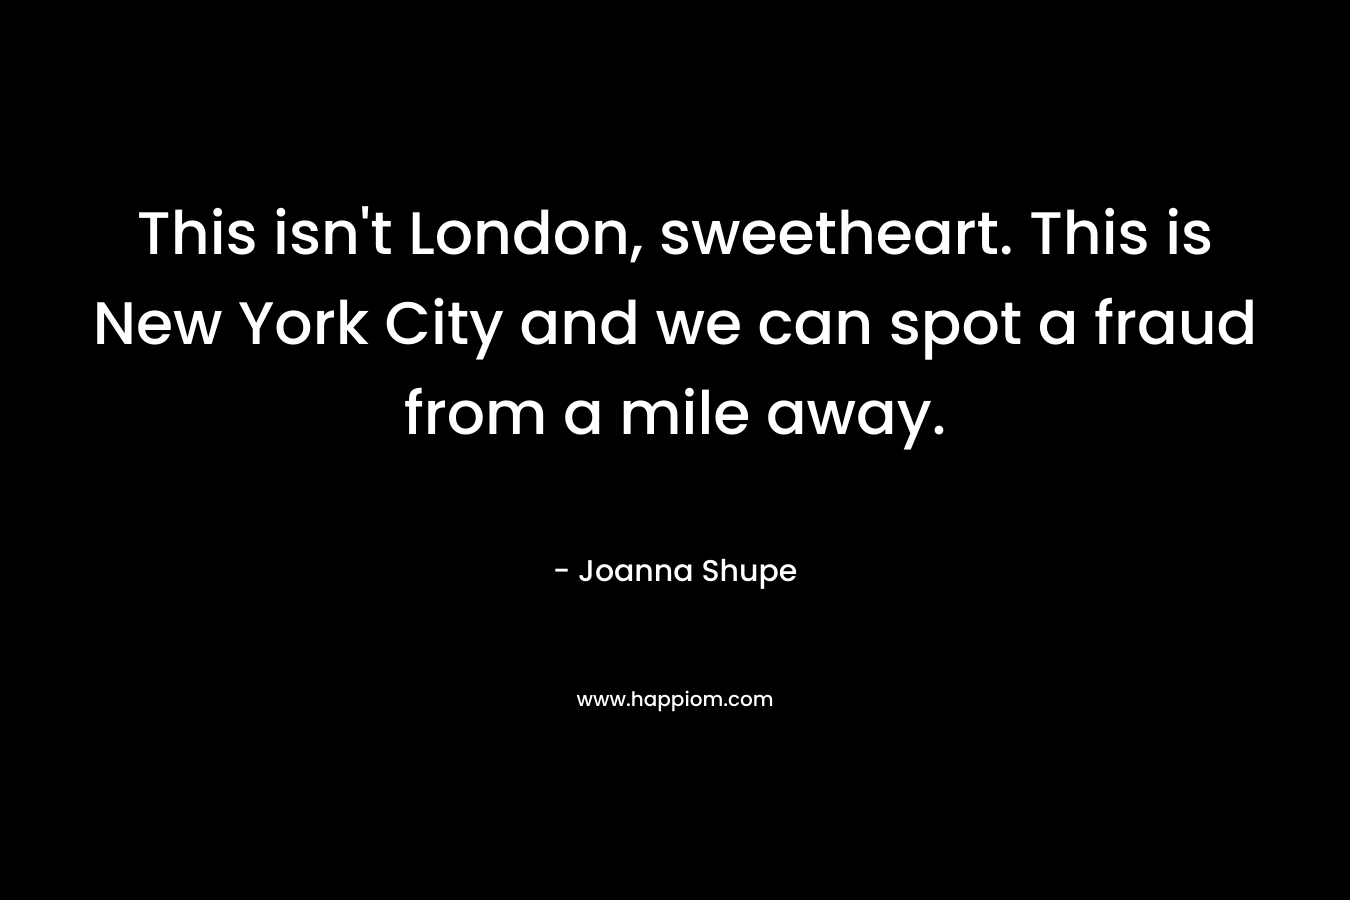 This isn’t London, sweetheart. This is New York City and we can spot a fraud from a mile away. – Joanna Shupe